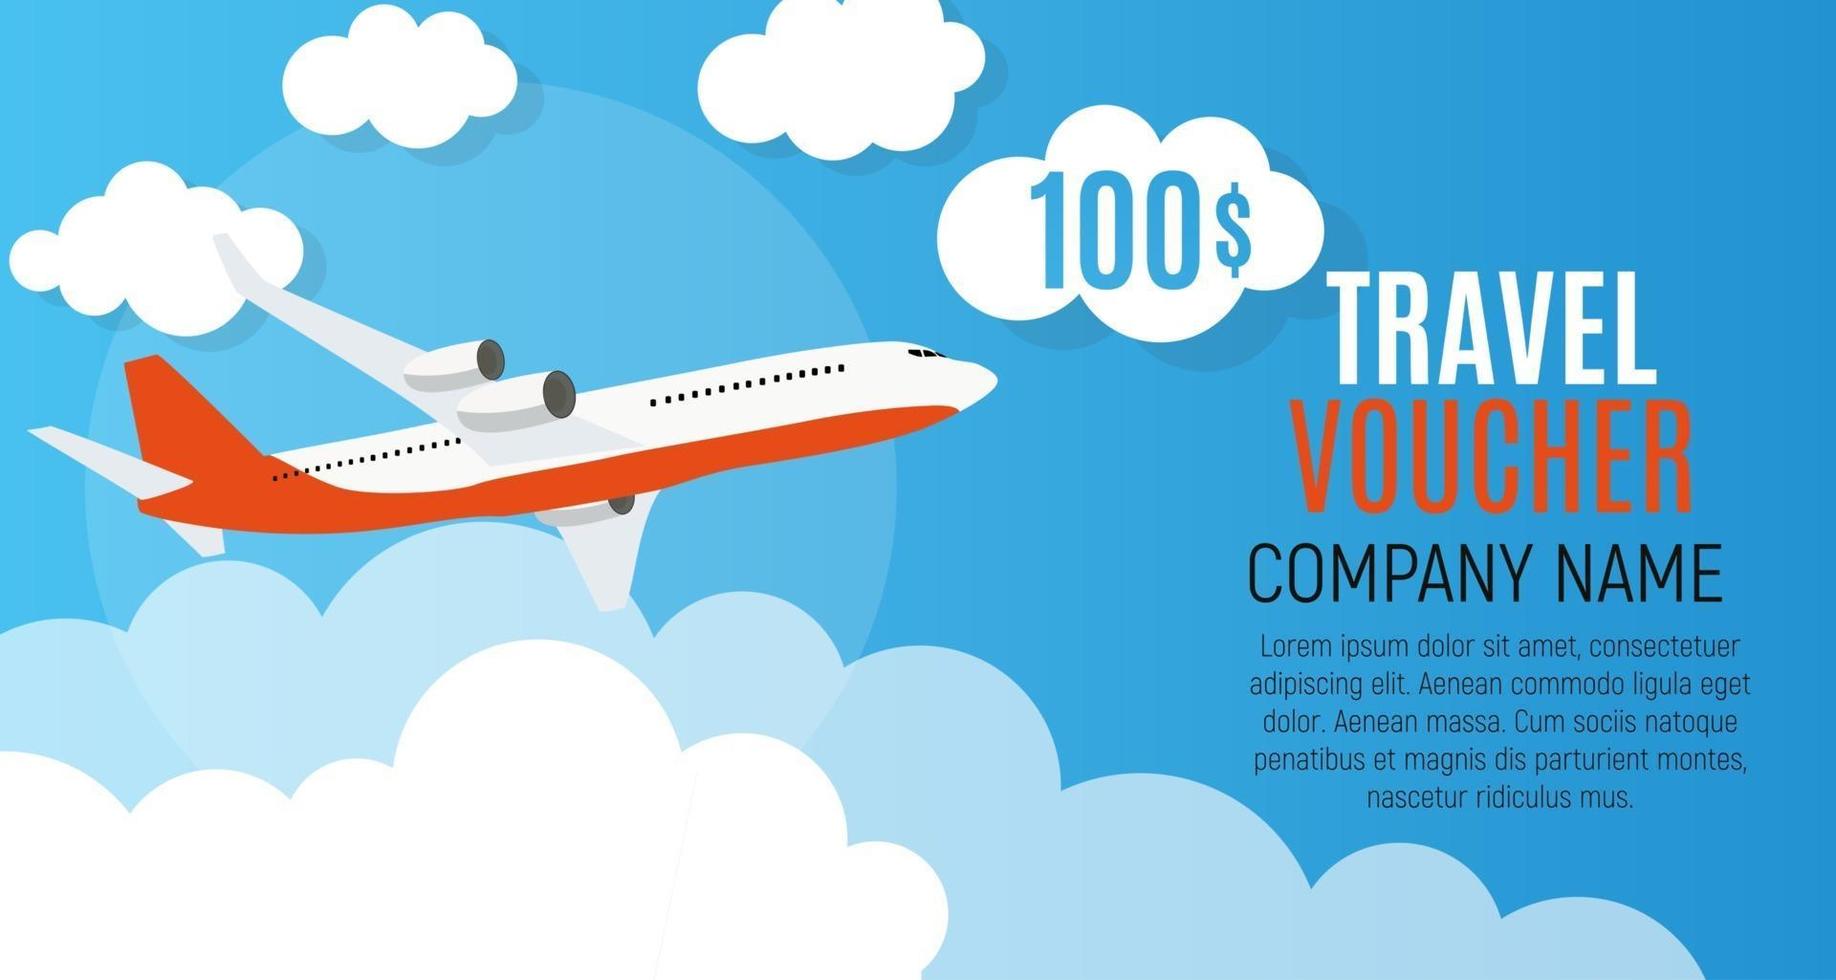 Travel Voucher 100 Dollar Template Background with Airplane. Vector Illustration